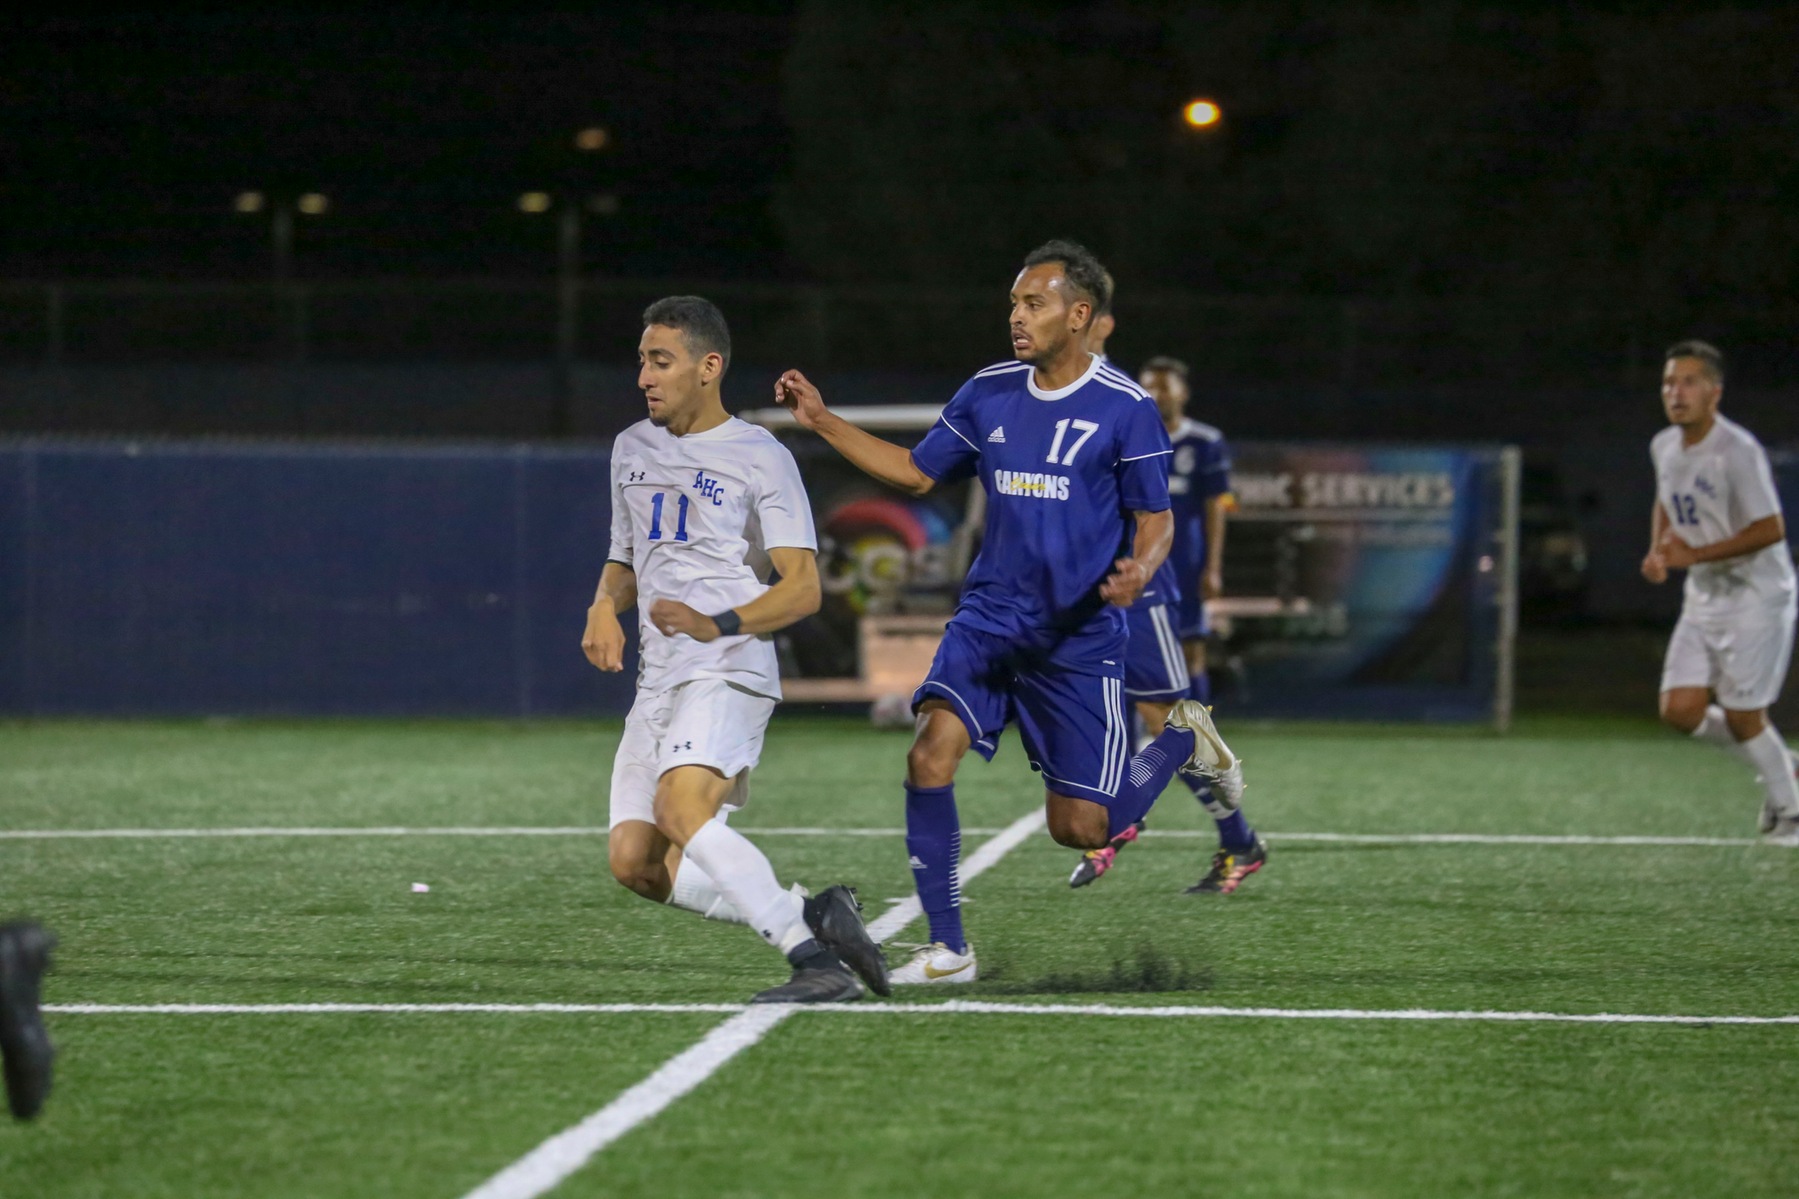 College of the Canyons sophomore forward Andres Lozano recorded a hat trick in his first start of the season to help lead the Cougars to a. 5-1 victory over Allan Hancock College. Jesse Muñoz/COC Sports Information Director